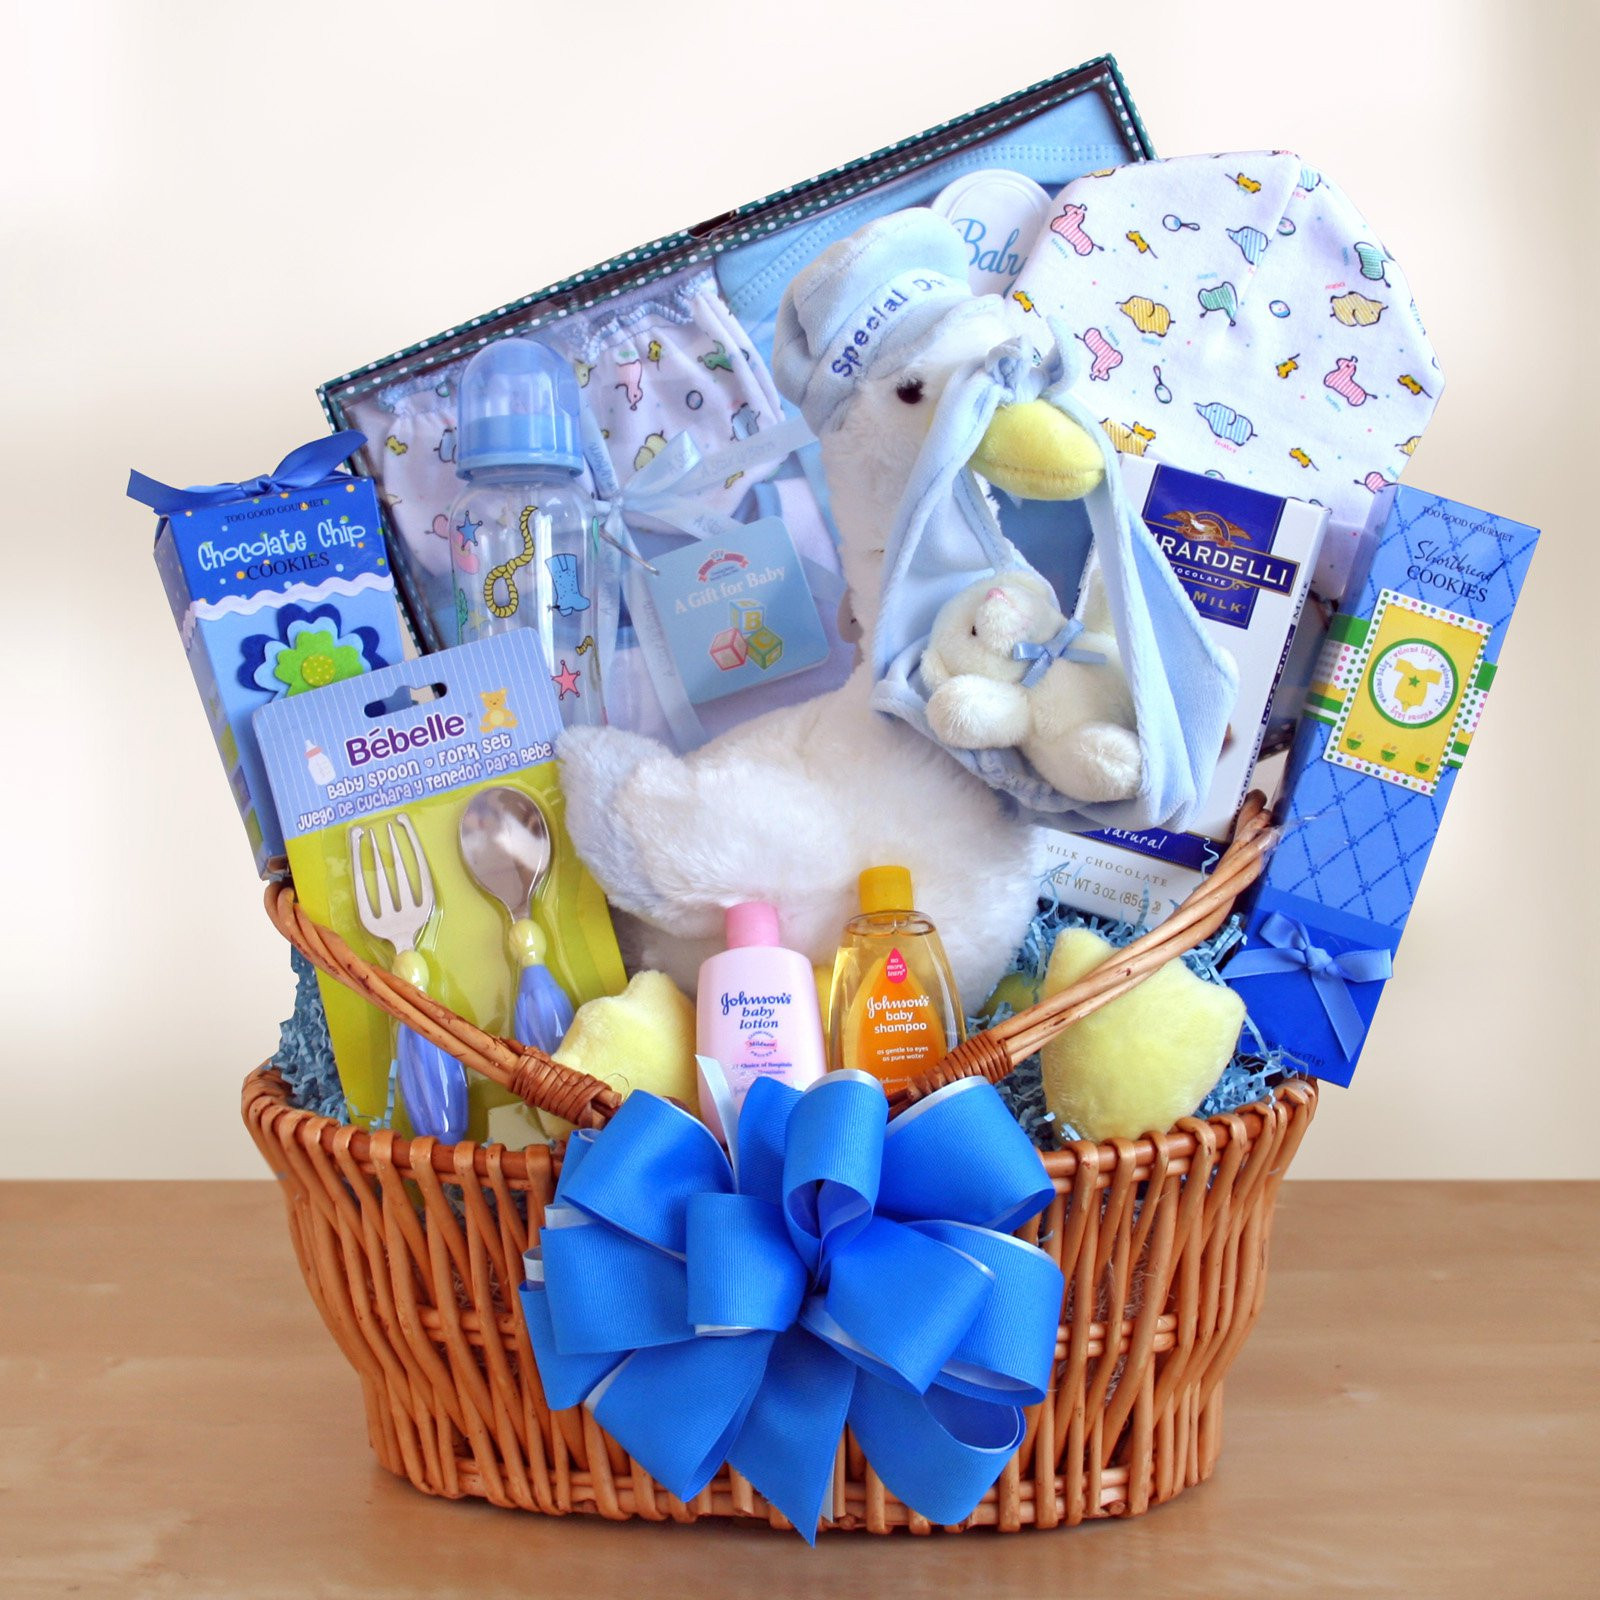 Baby Boy Baby Shower Gift Ideas
 Special Stork Delivery Baby Boy Gift Basket Gift Baskets